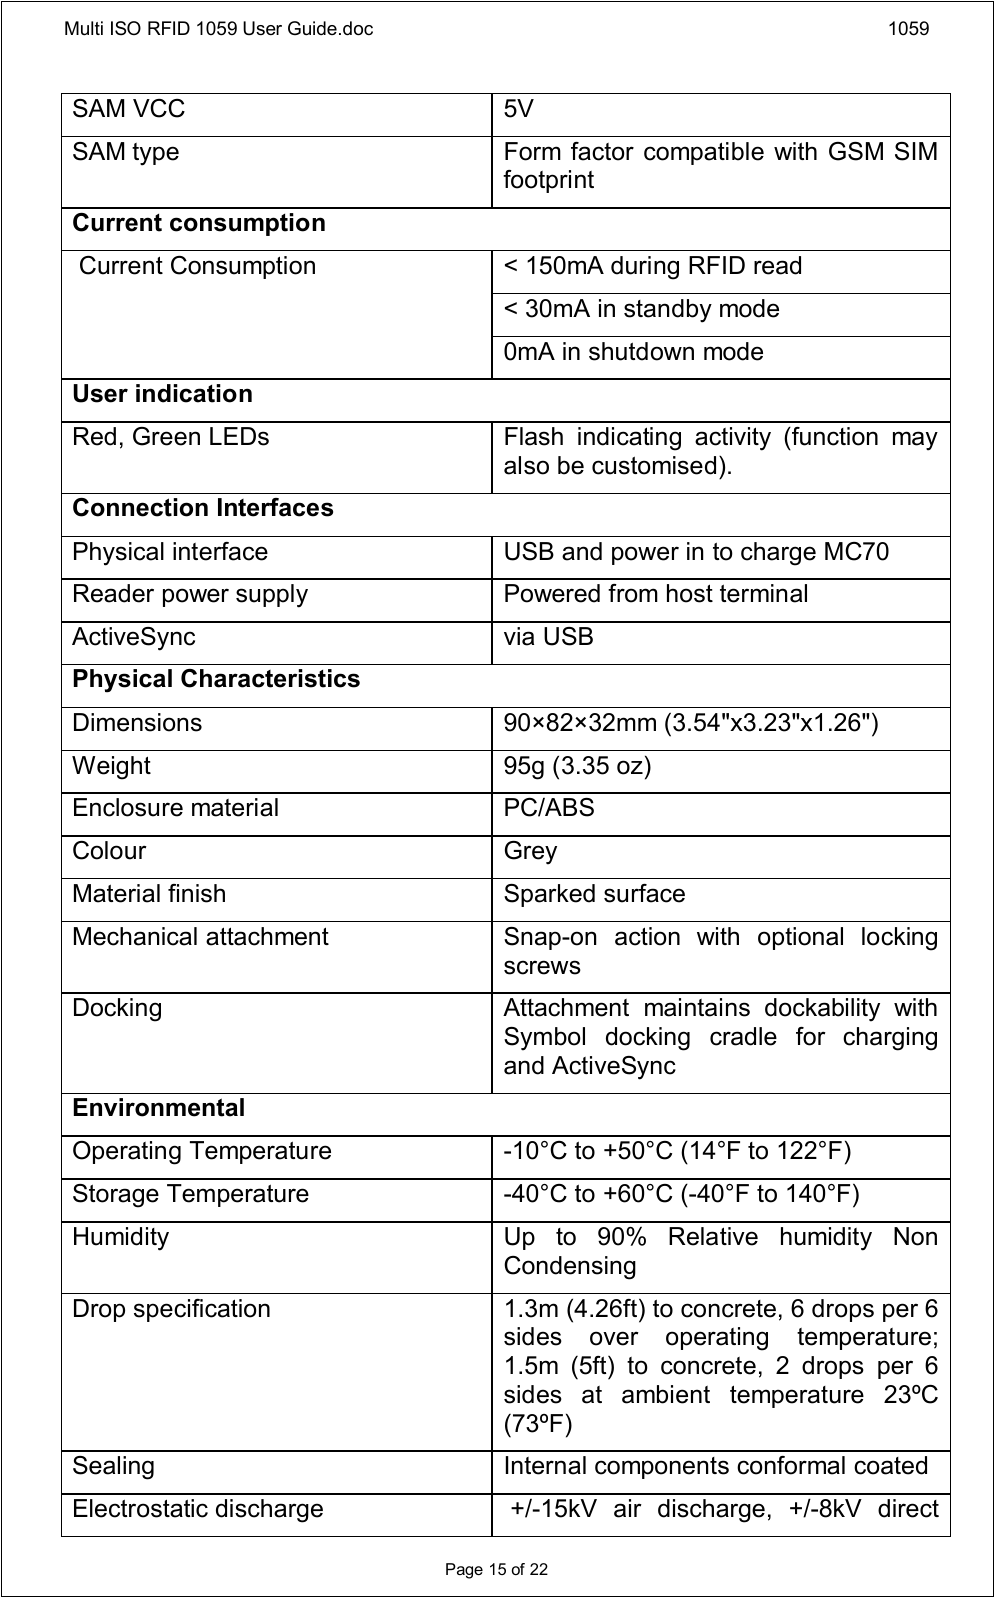 Multi ISO RFID 1059 User Guide.doc 1059Page 15 of 22SAM VCC 5VSAM type Form factor compatible with GSM SIM footprintCurrent consumption&lt; 150mA during RFID read&lt; 30mA in standby mode Current Consumption  0mA in shutdown modeUser indicationRed, Green LEDs Flash  indicating  activity  (function  may also be customised).Connection InterfacesPhysical interface USB and power in to charge MC70Reader power supply Powered from host terminalActiveSync via USBPhysical CharacteristicsDimensions 90×82×32mm (3.54&quot;x3.23&quot;x1.26&quot;)Weight 95g (3.35 oz)Enclosure material PC/ABSColour GreyMaterial finish Sparked surfaceMechanical attachment Snap-on  action  with  optional  locking screwsDocking Attachment  maintains  dockability  with Symbol  docking  cradle  for  charging and ActiveSyncEnvironmentalOperating Temperature -10°C to +50°C (14°F to 122°F)Storage Temperature -40°C to +60°C (-40°F to 140°F)Humidity Up  to  90%  Relative  humidity  Non CondensingDrop specification 1.3m (4.26ft) to concrete, 6 drops per 6 sides  over  operating  temperature; 1.5m  (5ft)  to  concrete,  2  drops  per  6 sides  at  ambient  temperature  23ºC (73ºF)Sealing Internal components conformal coatedElectrostatic discharge  +/-15kV  air  discharge,  +/-8kV  direct 